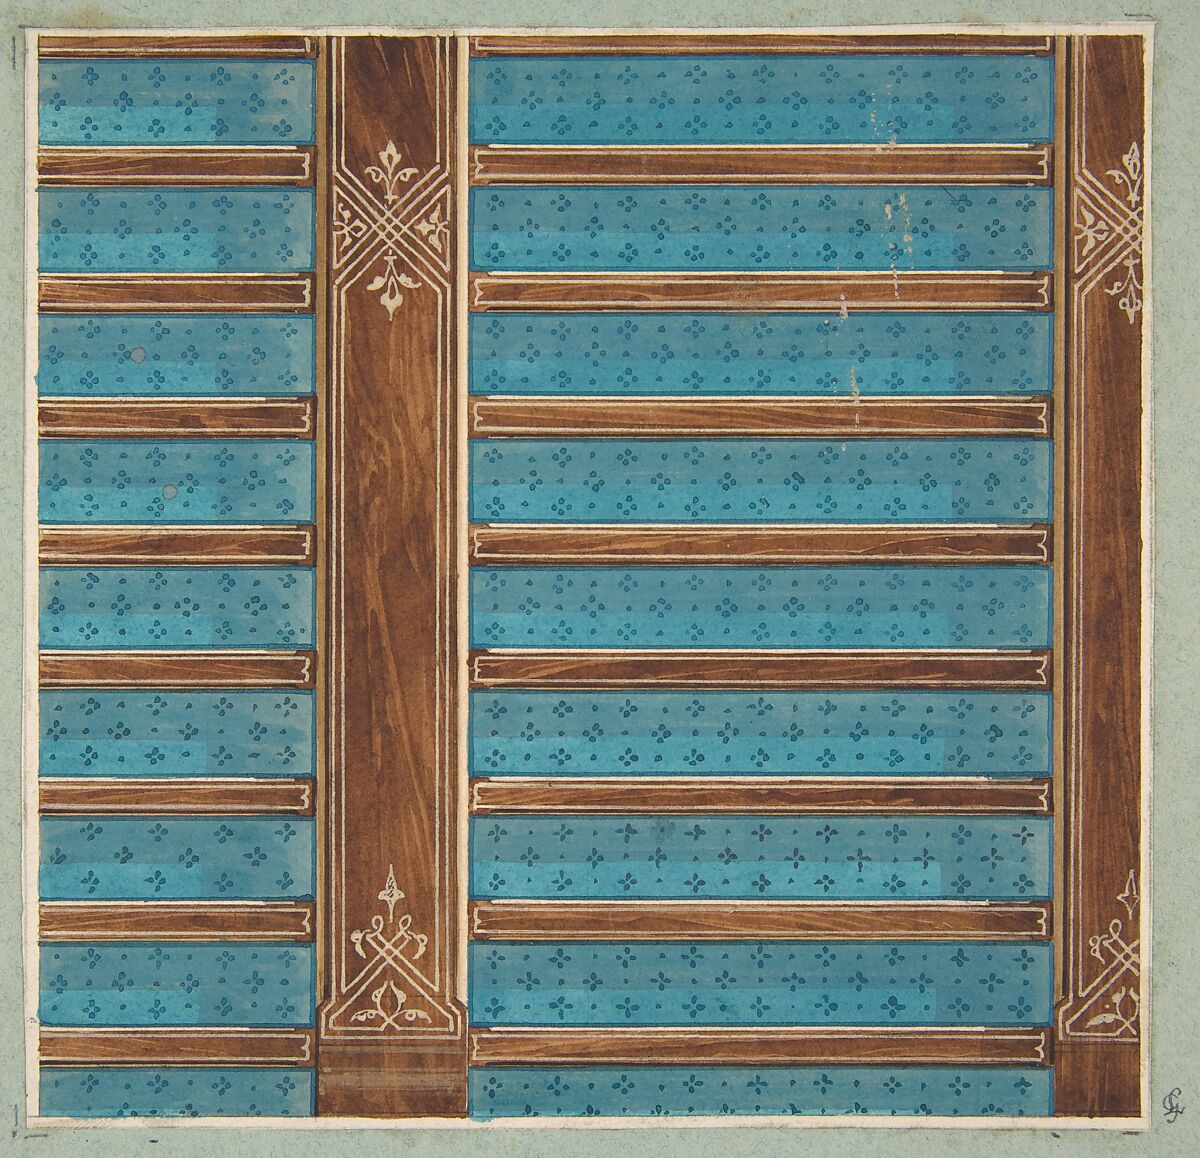 Design for the decoration of a beamed ceiling, Jules-Edmond-Charles Lachaise (French, died 1897), graphite and watercolor on wove paper; inlaid in blue wove paper 